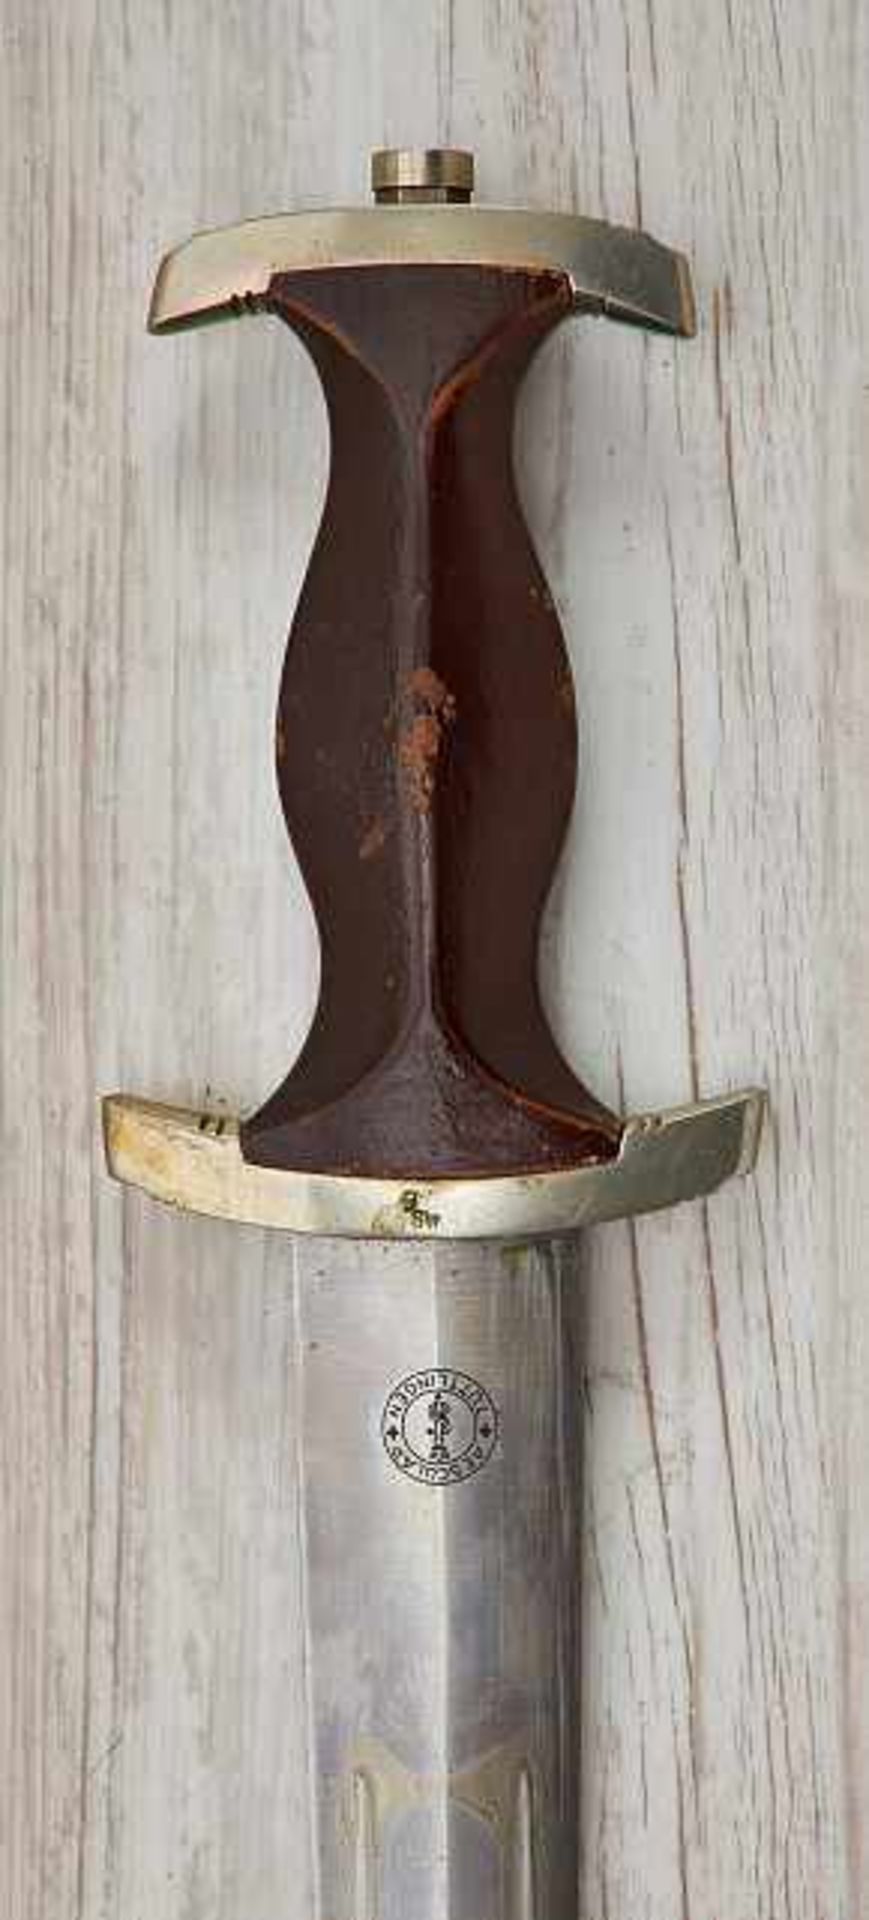 Deutsches Reich 1933 - 1945 - Sturmabteilung-SA : Early SA Dagger.Maker marked on ricasso to